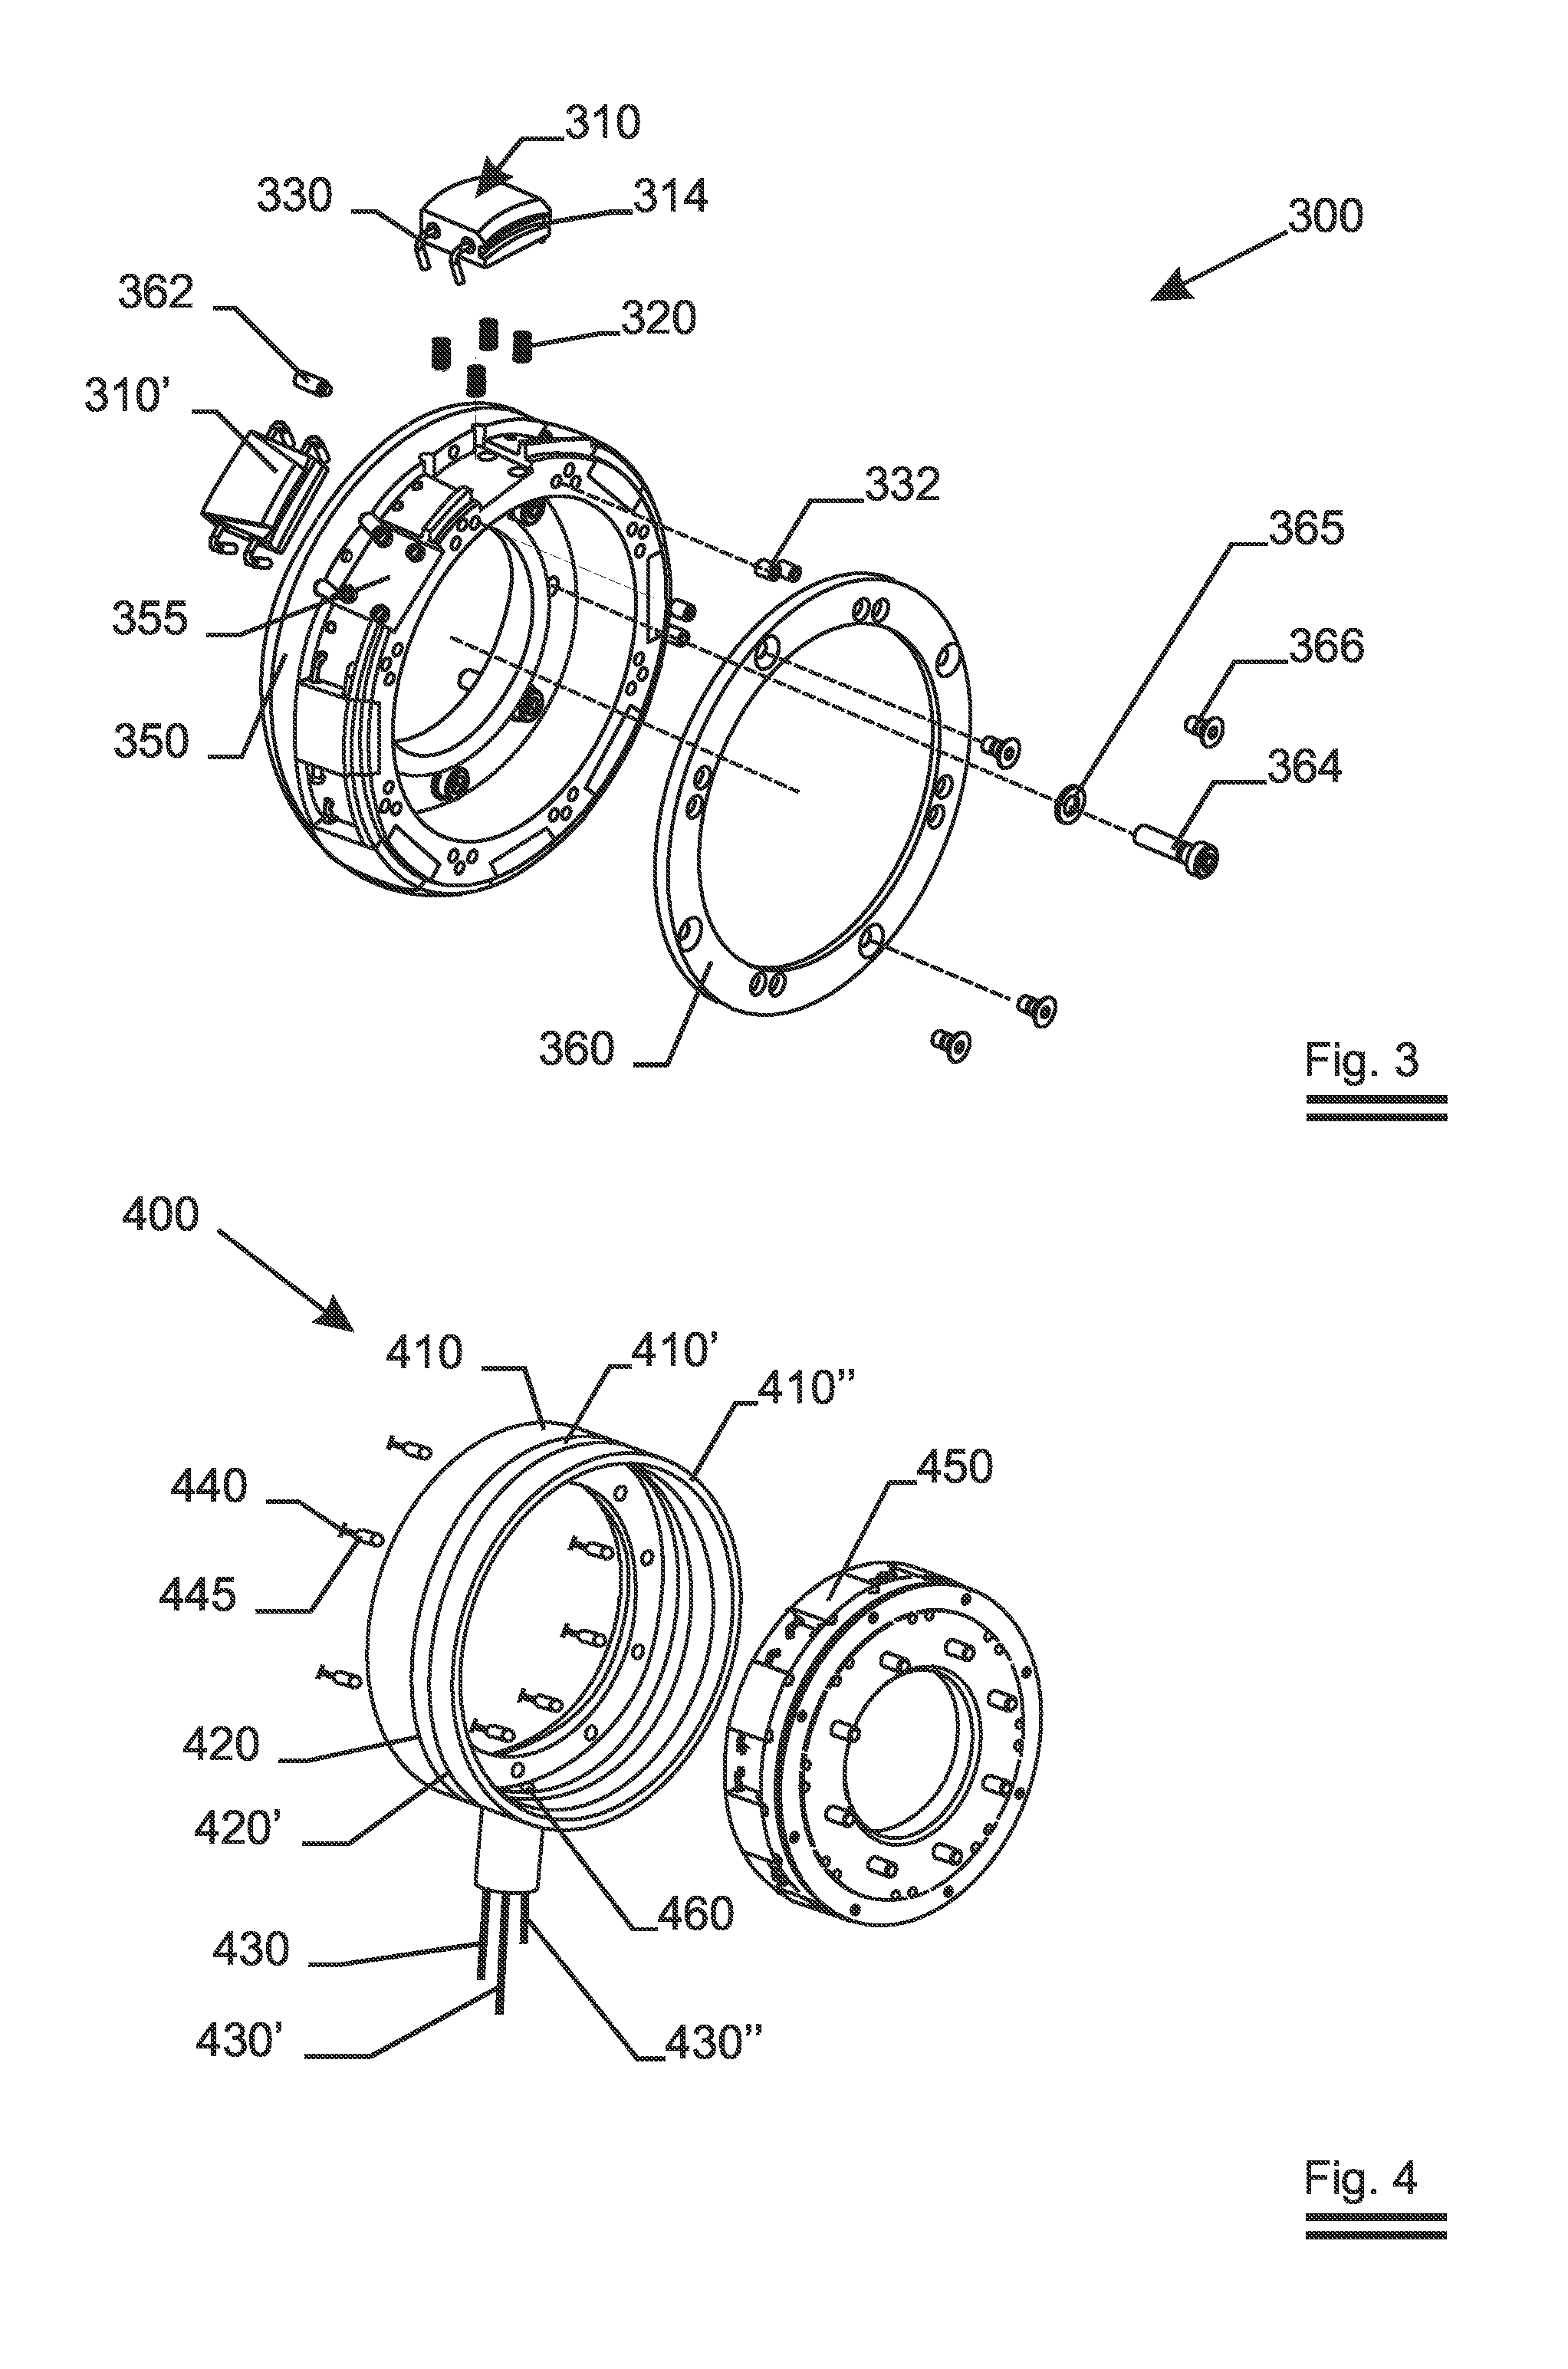 End-Block for a Rotatable Target Sputtering Apparatus